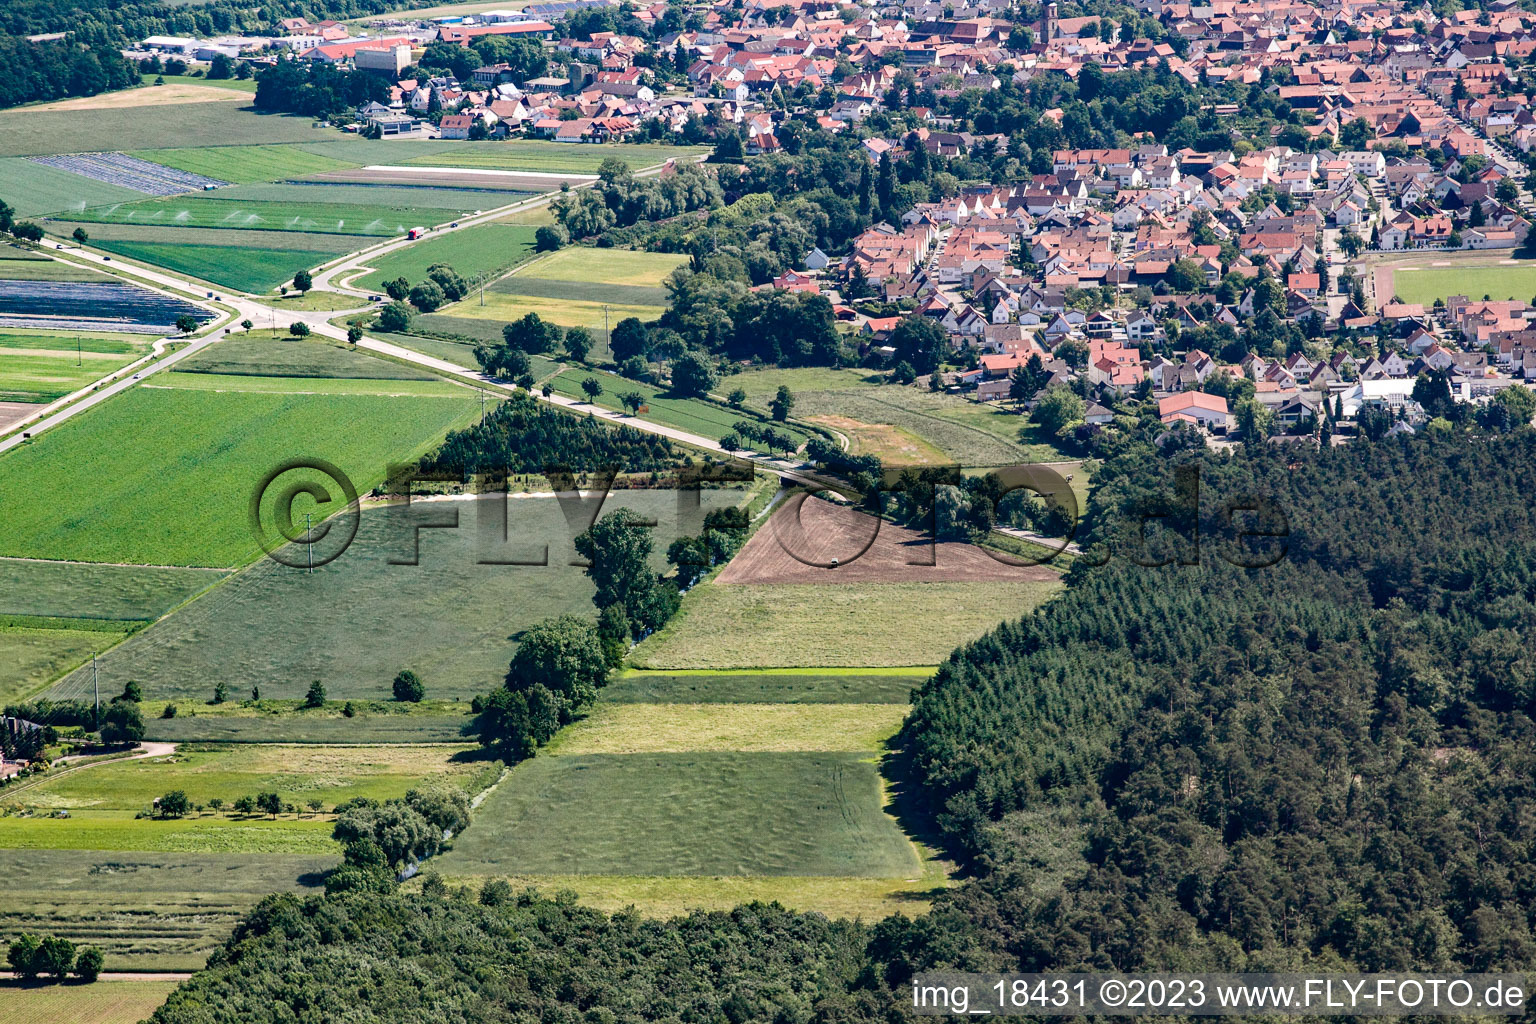 Hatzenbühl in the state Rhineland-Palatinate, Germany from above